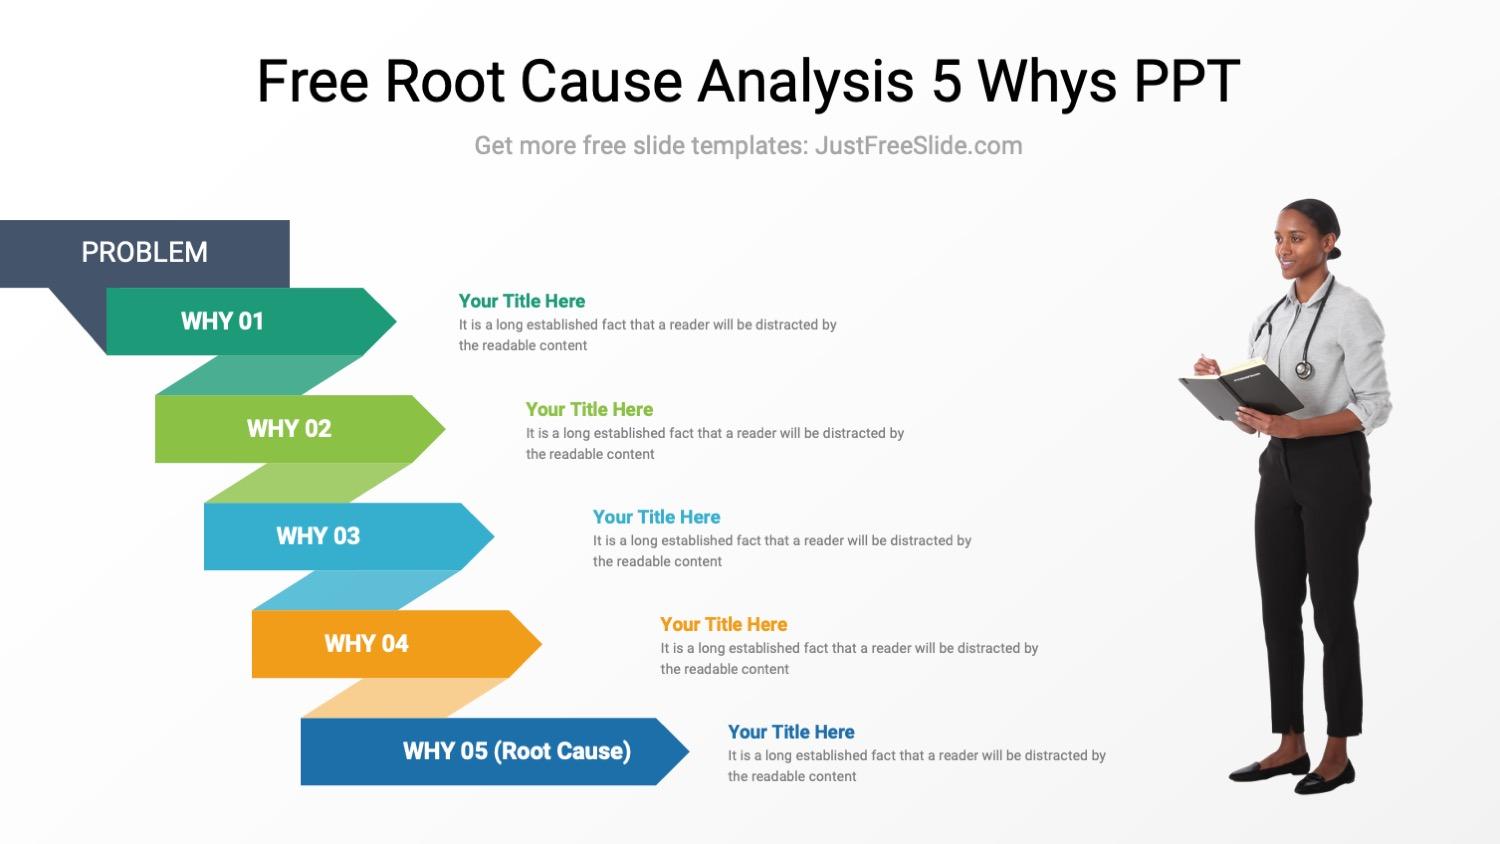 Root Cause Analysis 5 Whys PPT